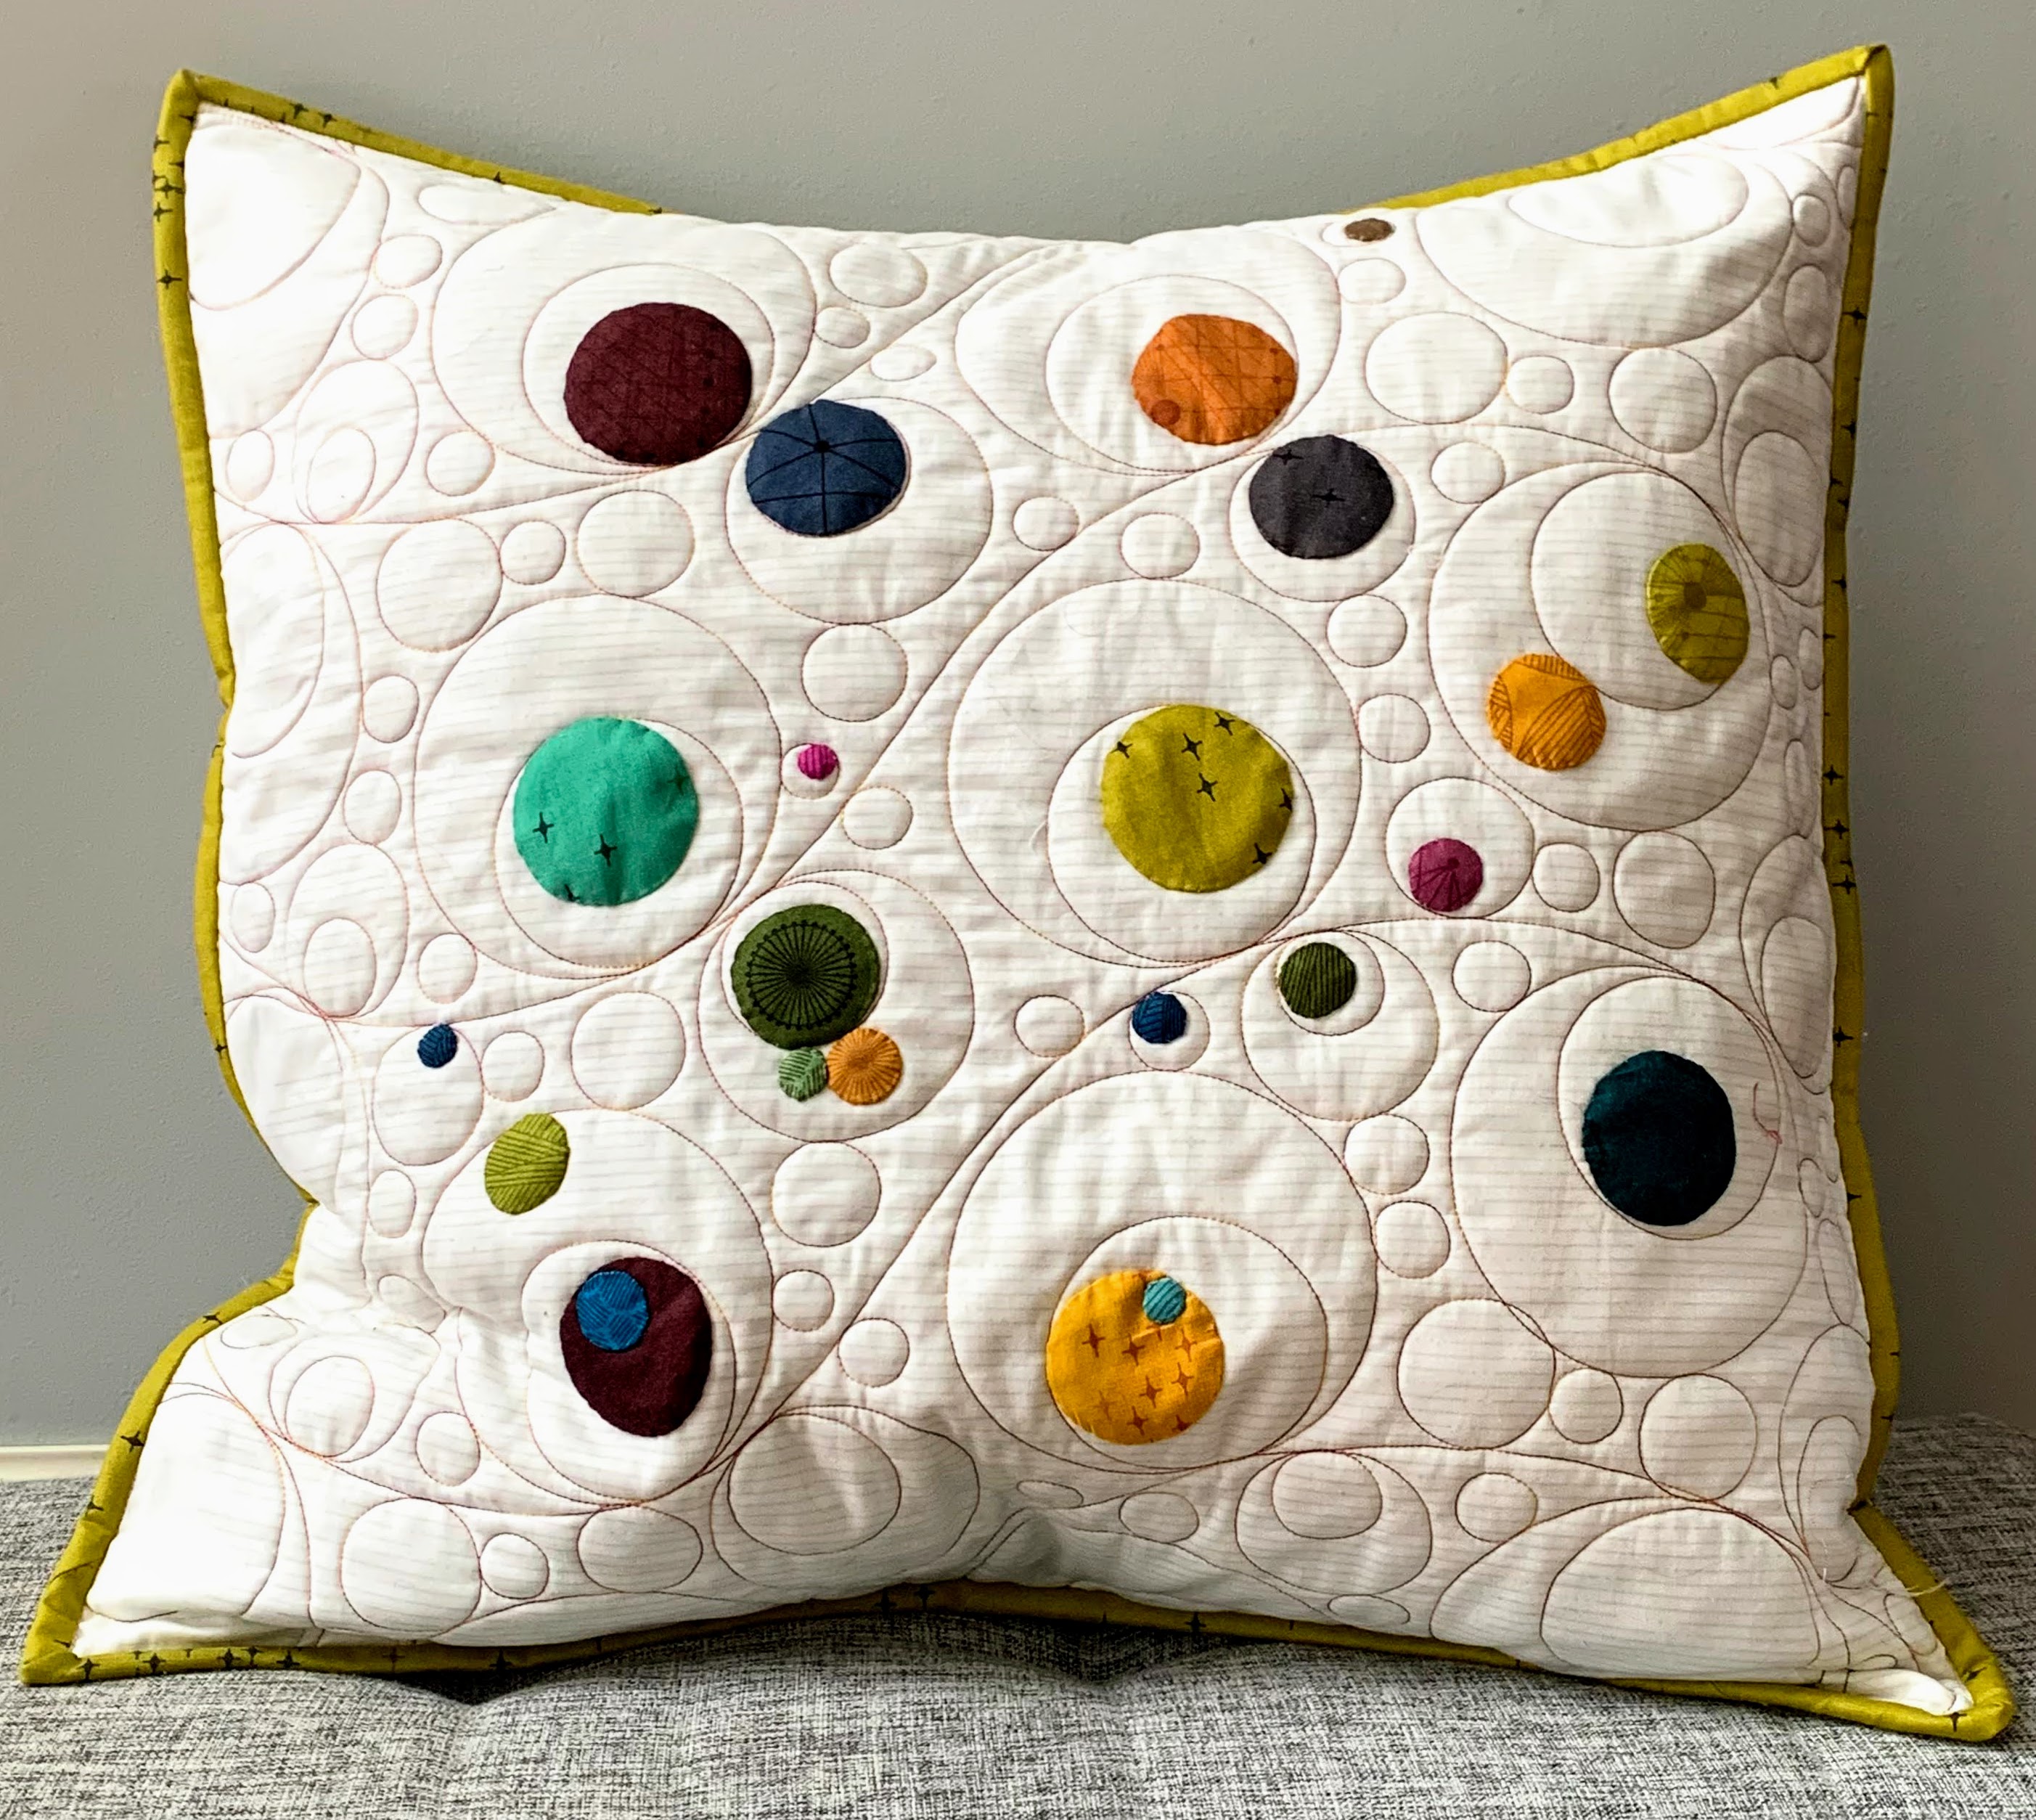 Pillow created with applipops templates